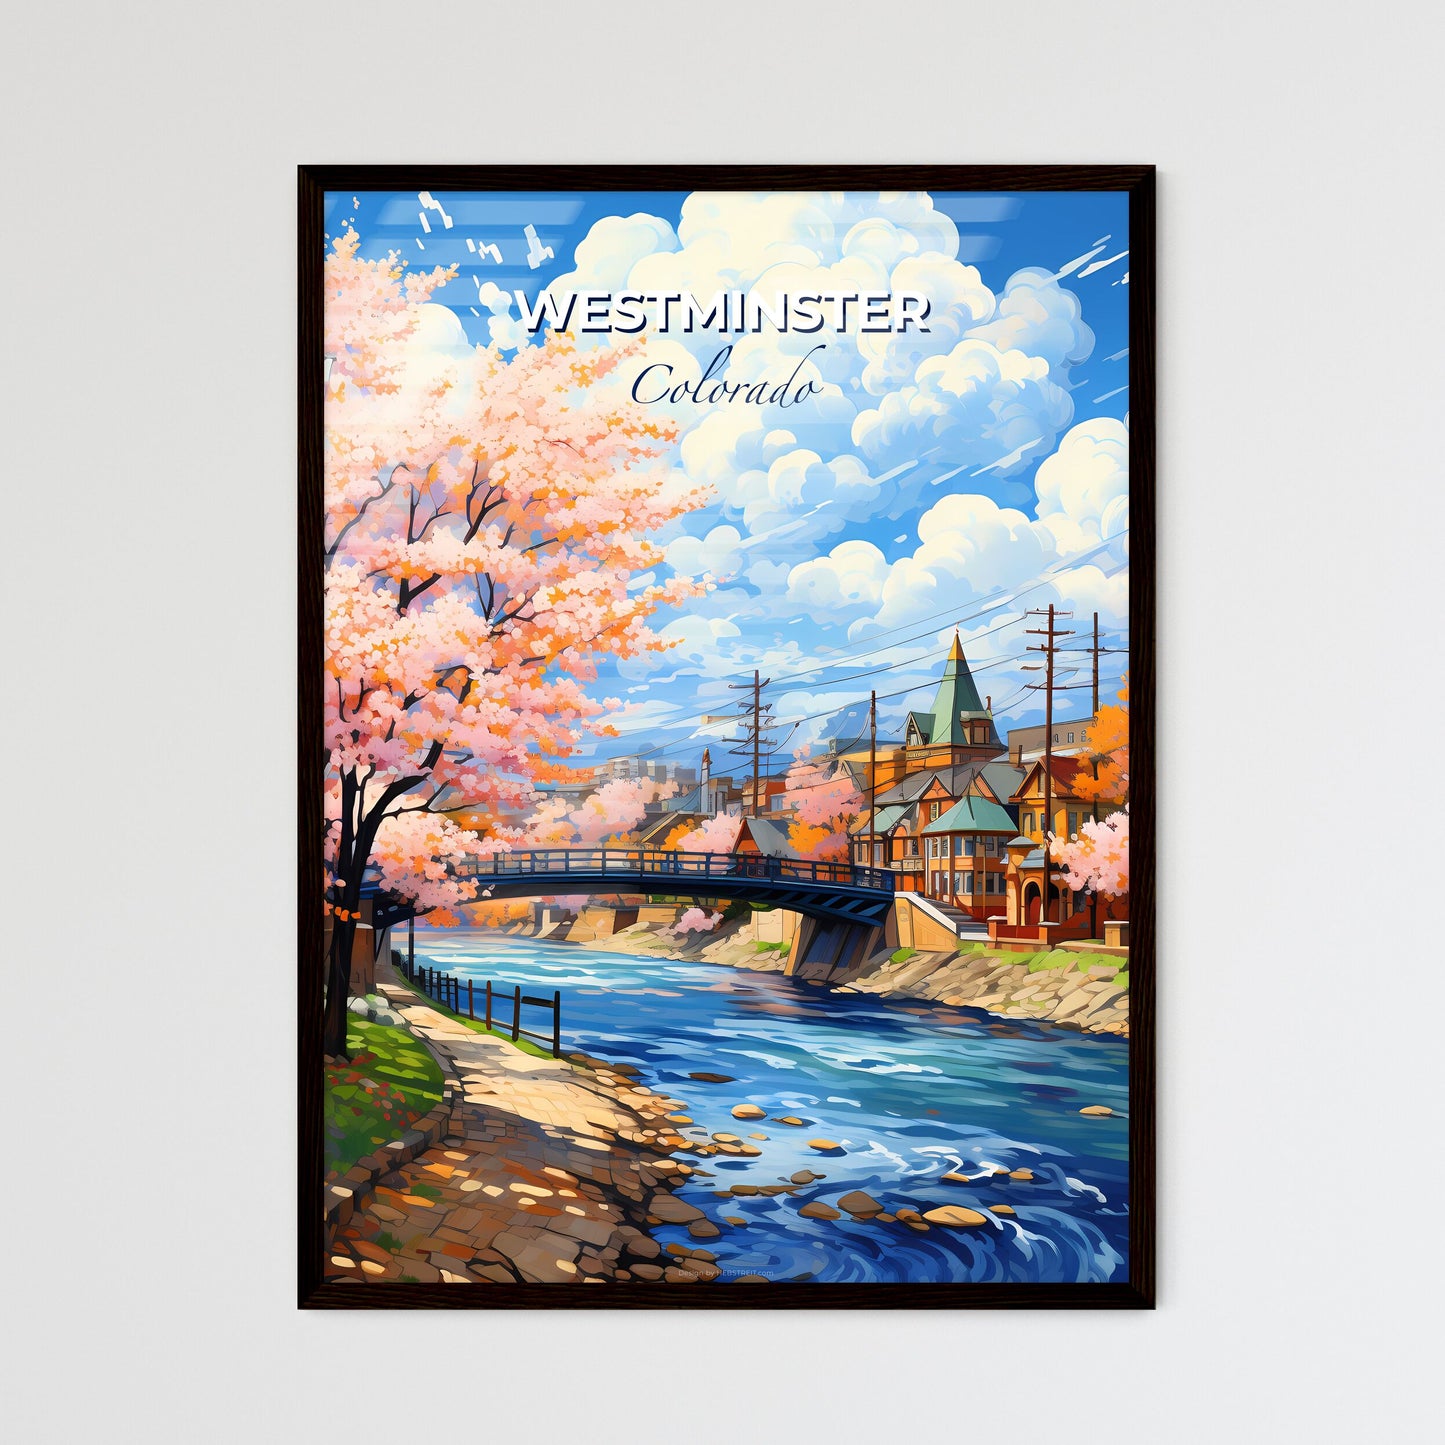 Westminster, Colorado, A Poster of a river with a bridge and trees Default Title